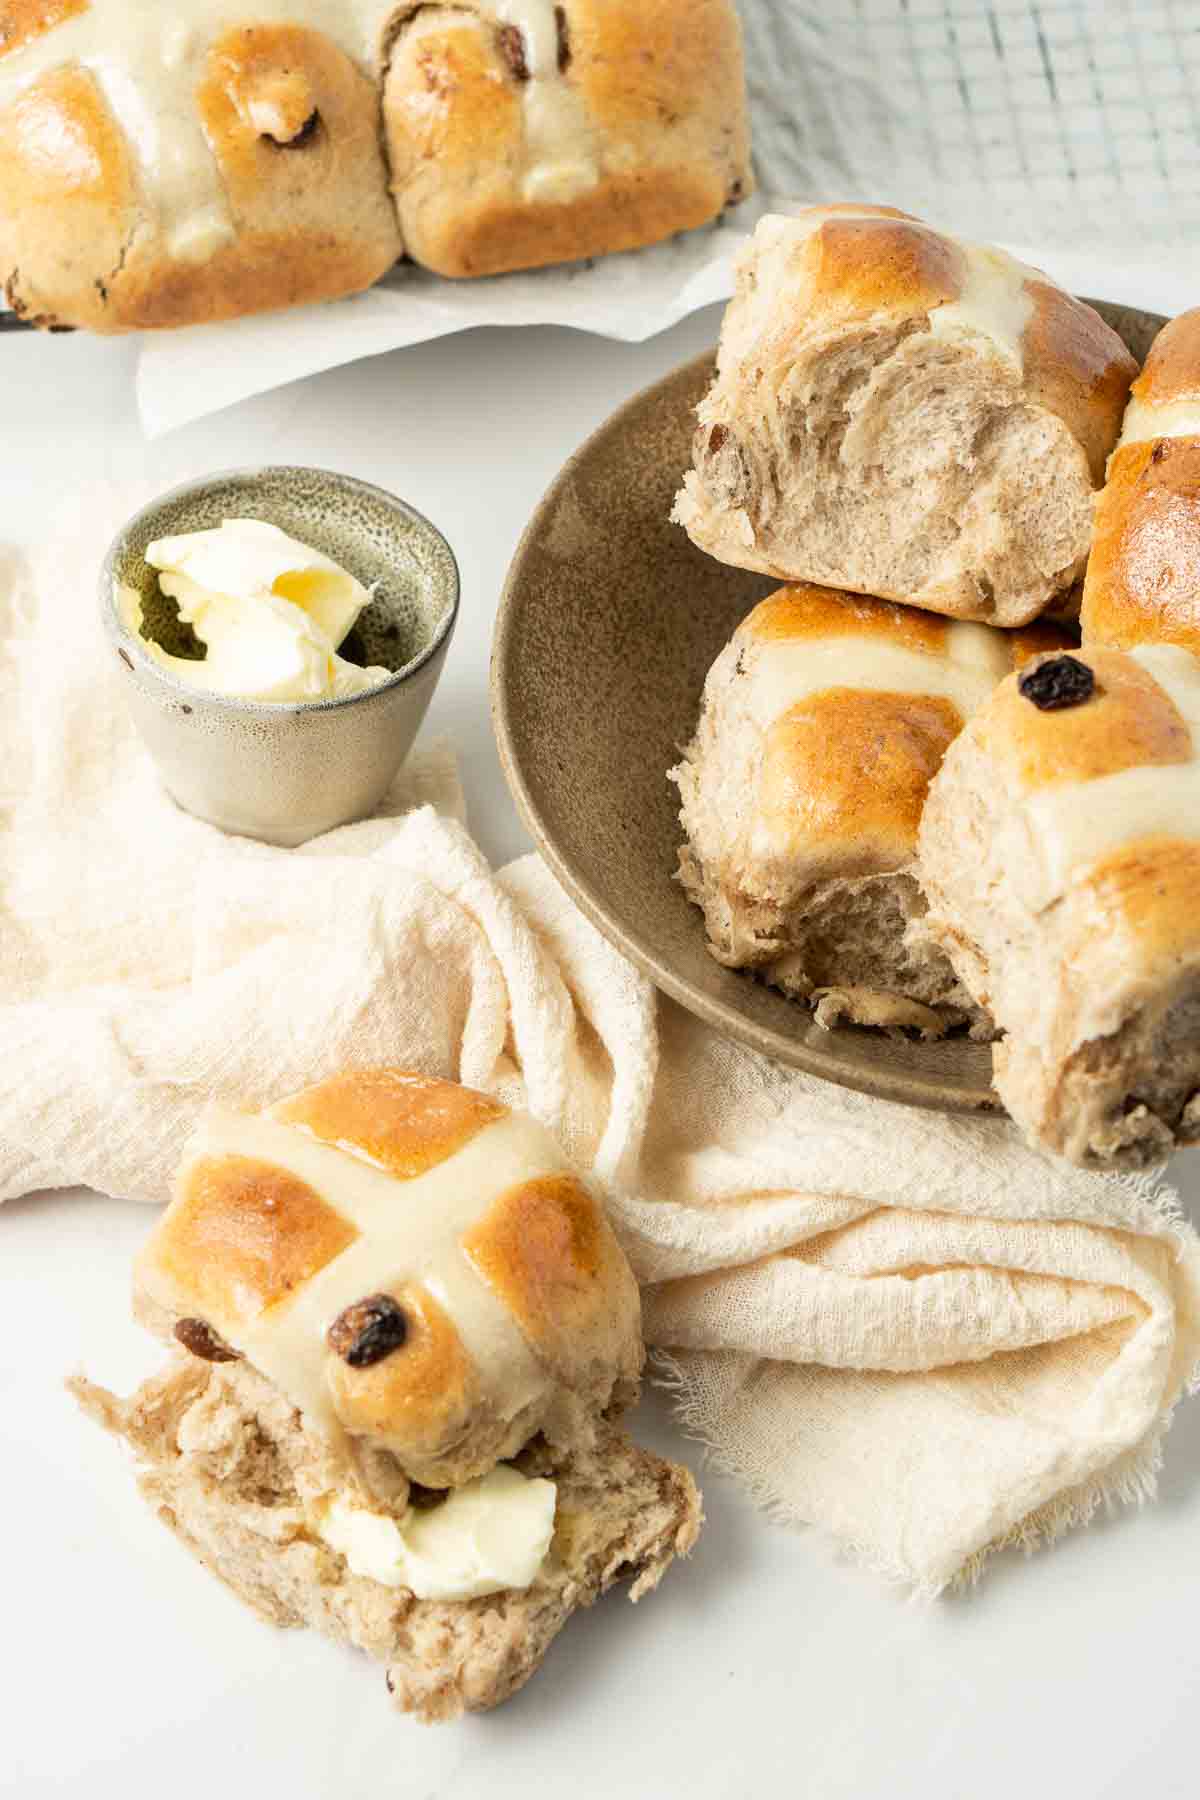 Freshly baked hot cross buns with butter.